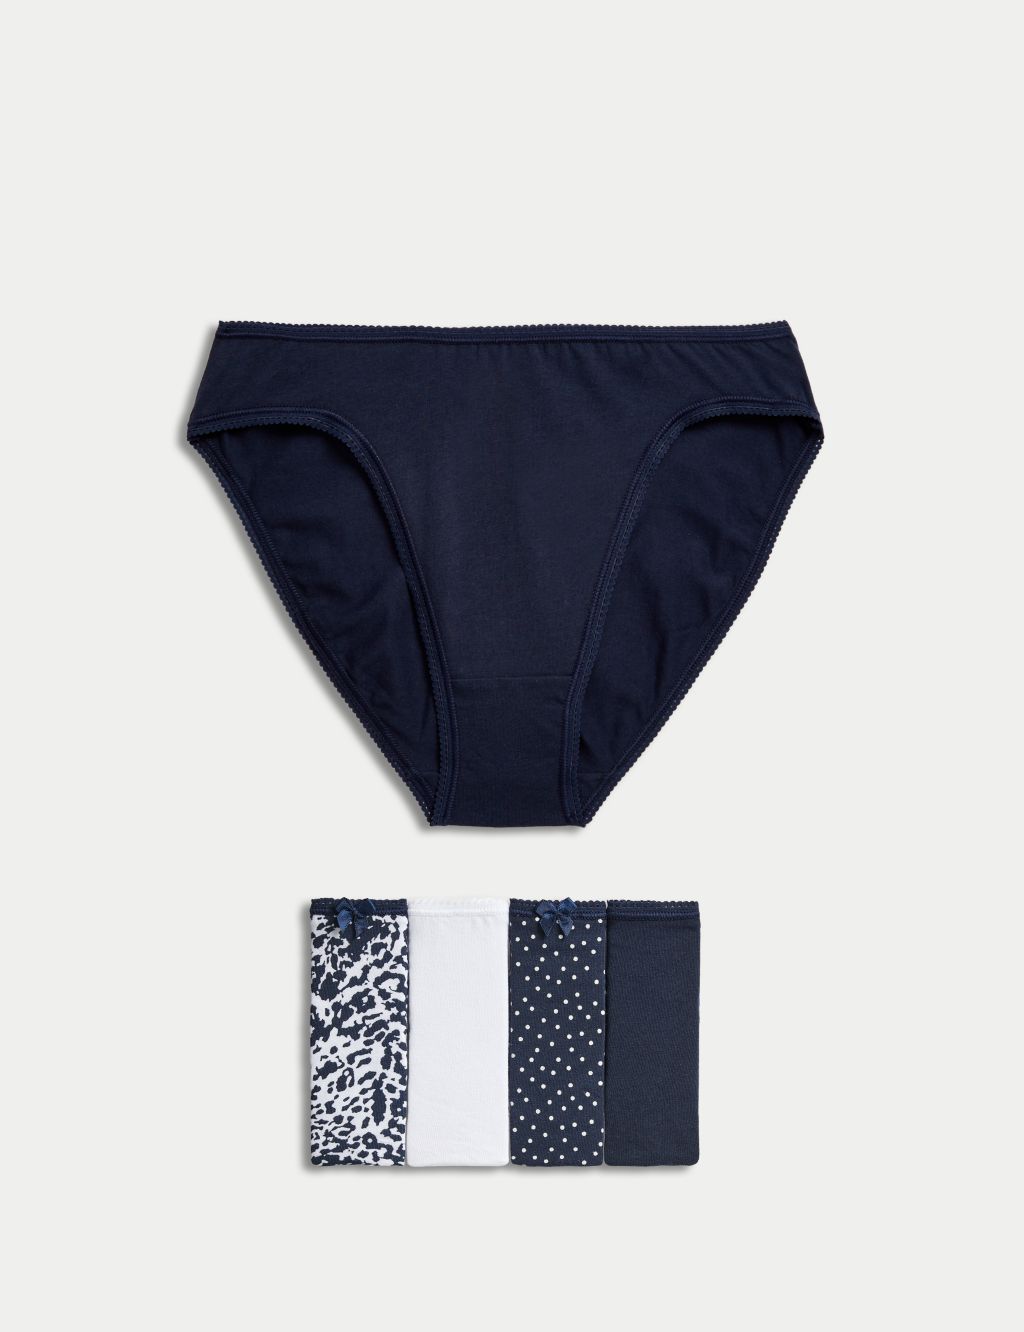 Buy Navy Blue/White High Leg Cotton Rich Knickers 4 Pack from Next Slovakia